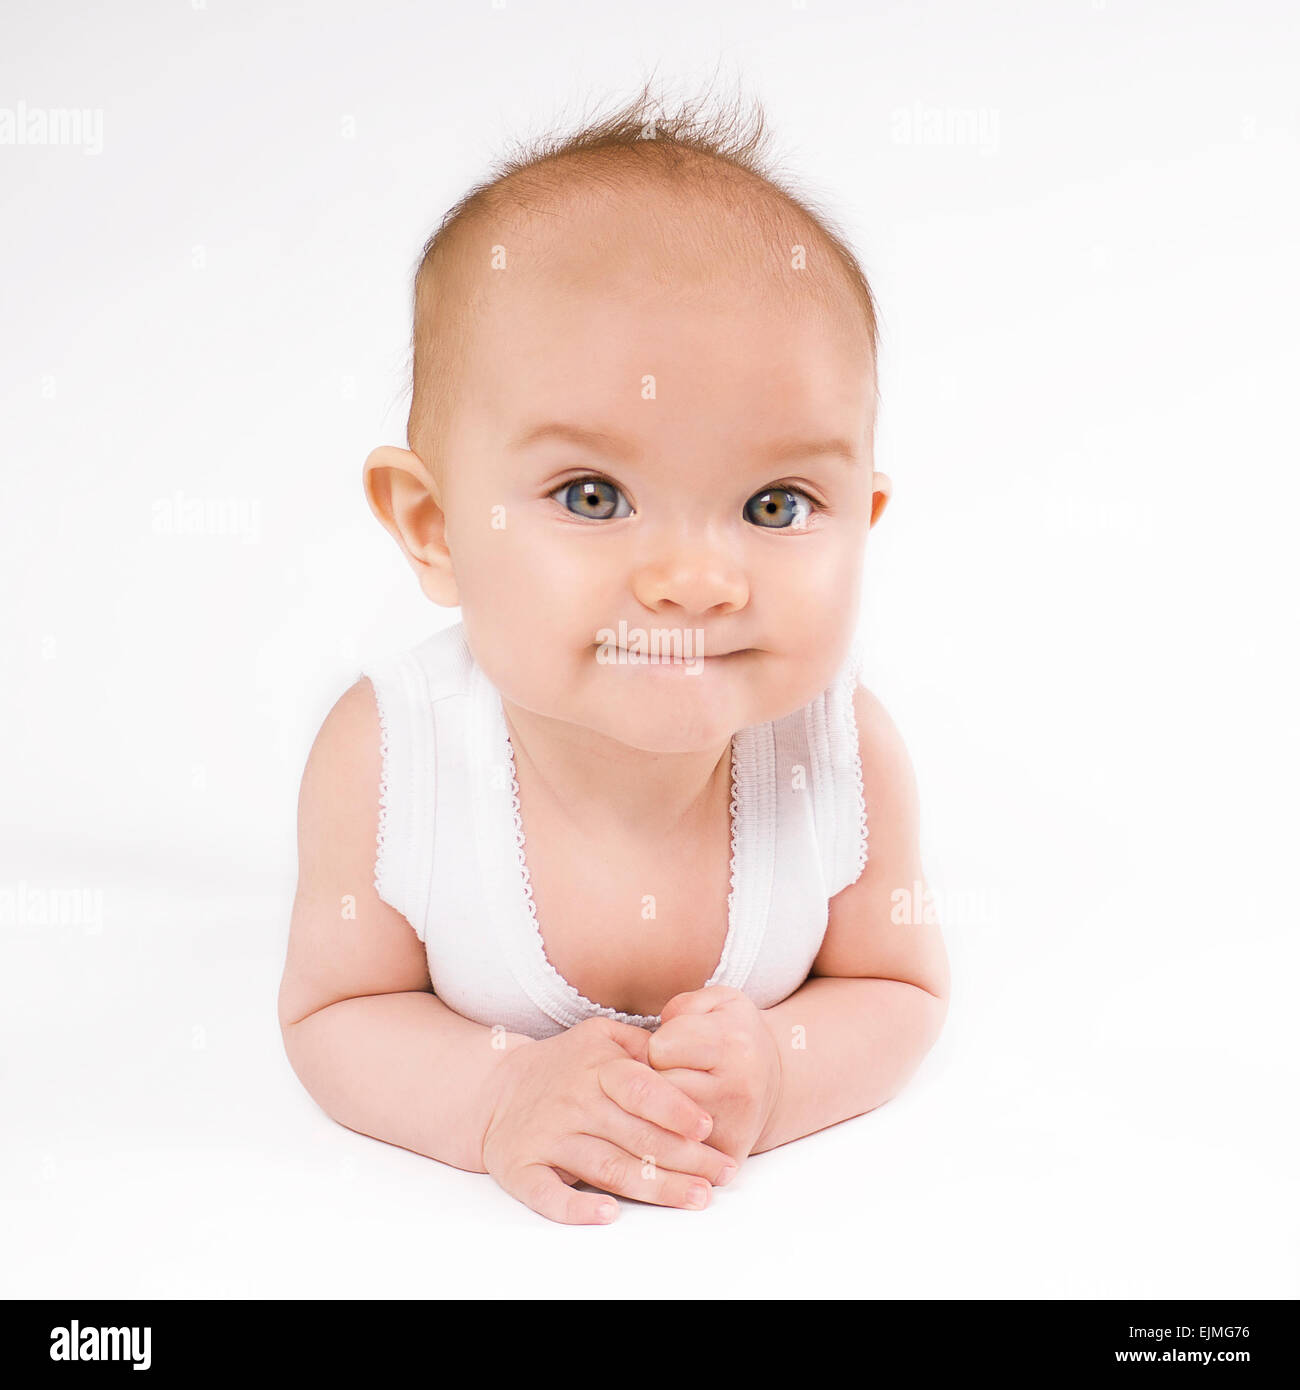 Cute funny baby on white background Stock Photo